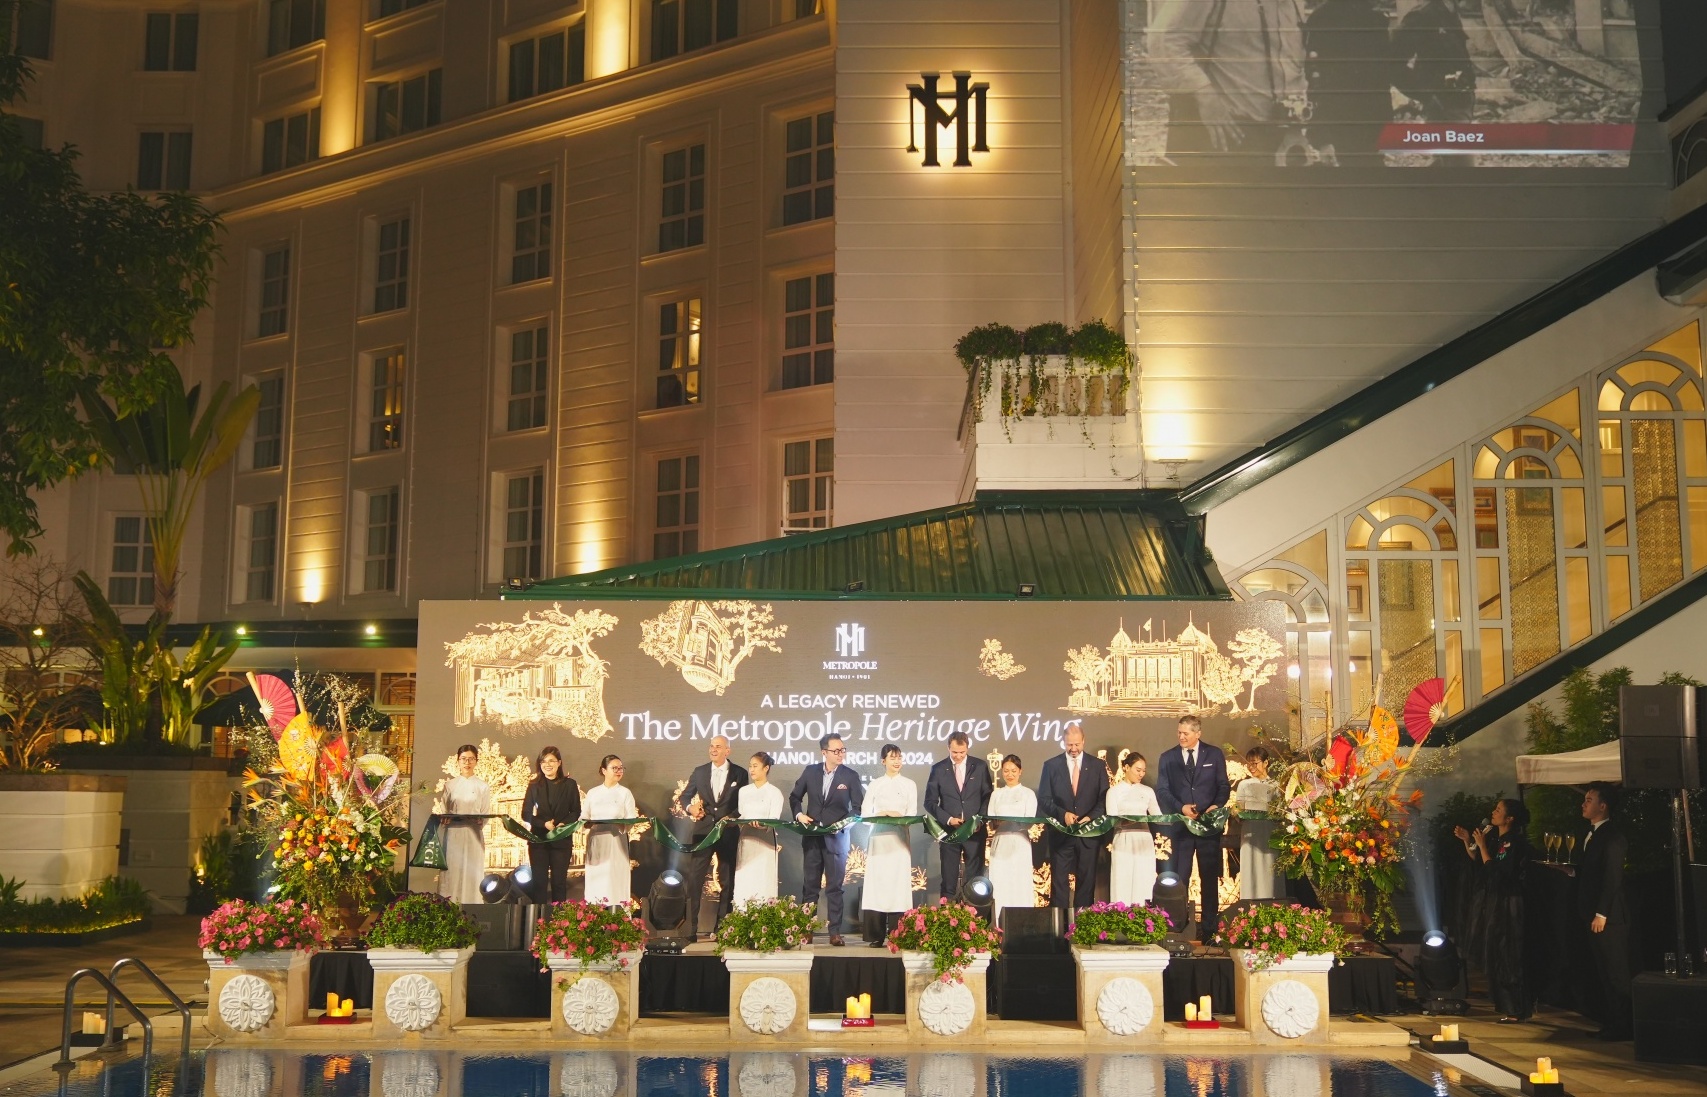 The Metropole welcomes the return of the iconic Heritage Wing